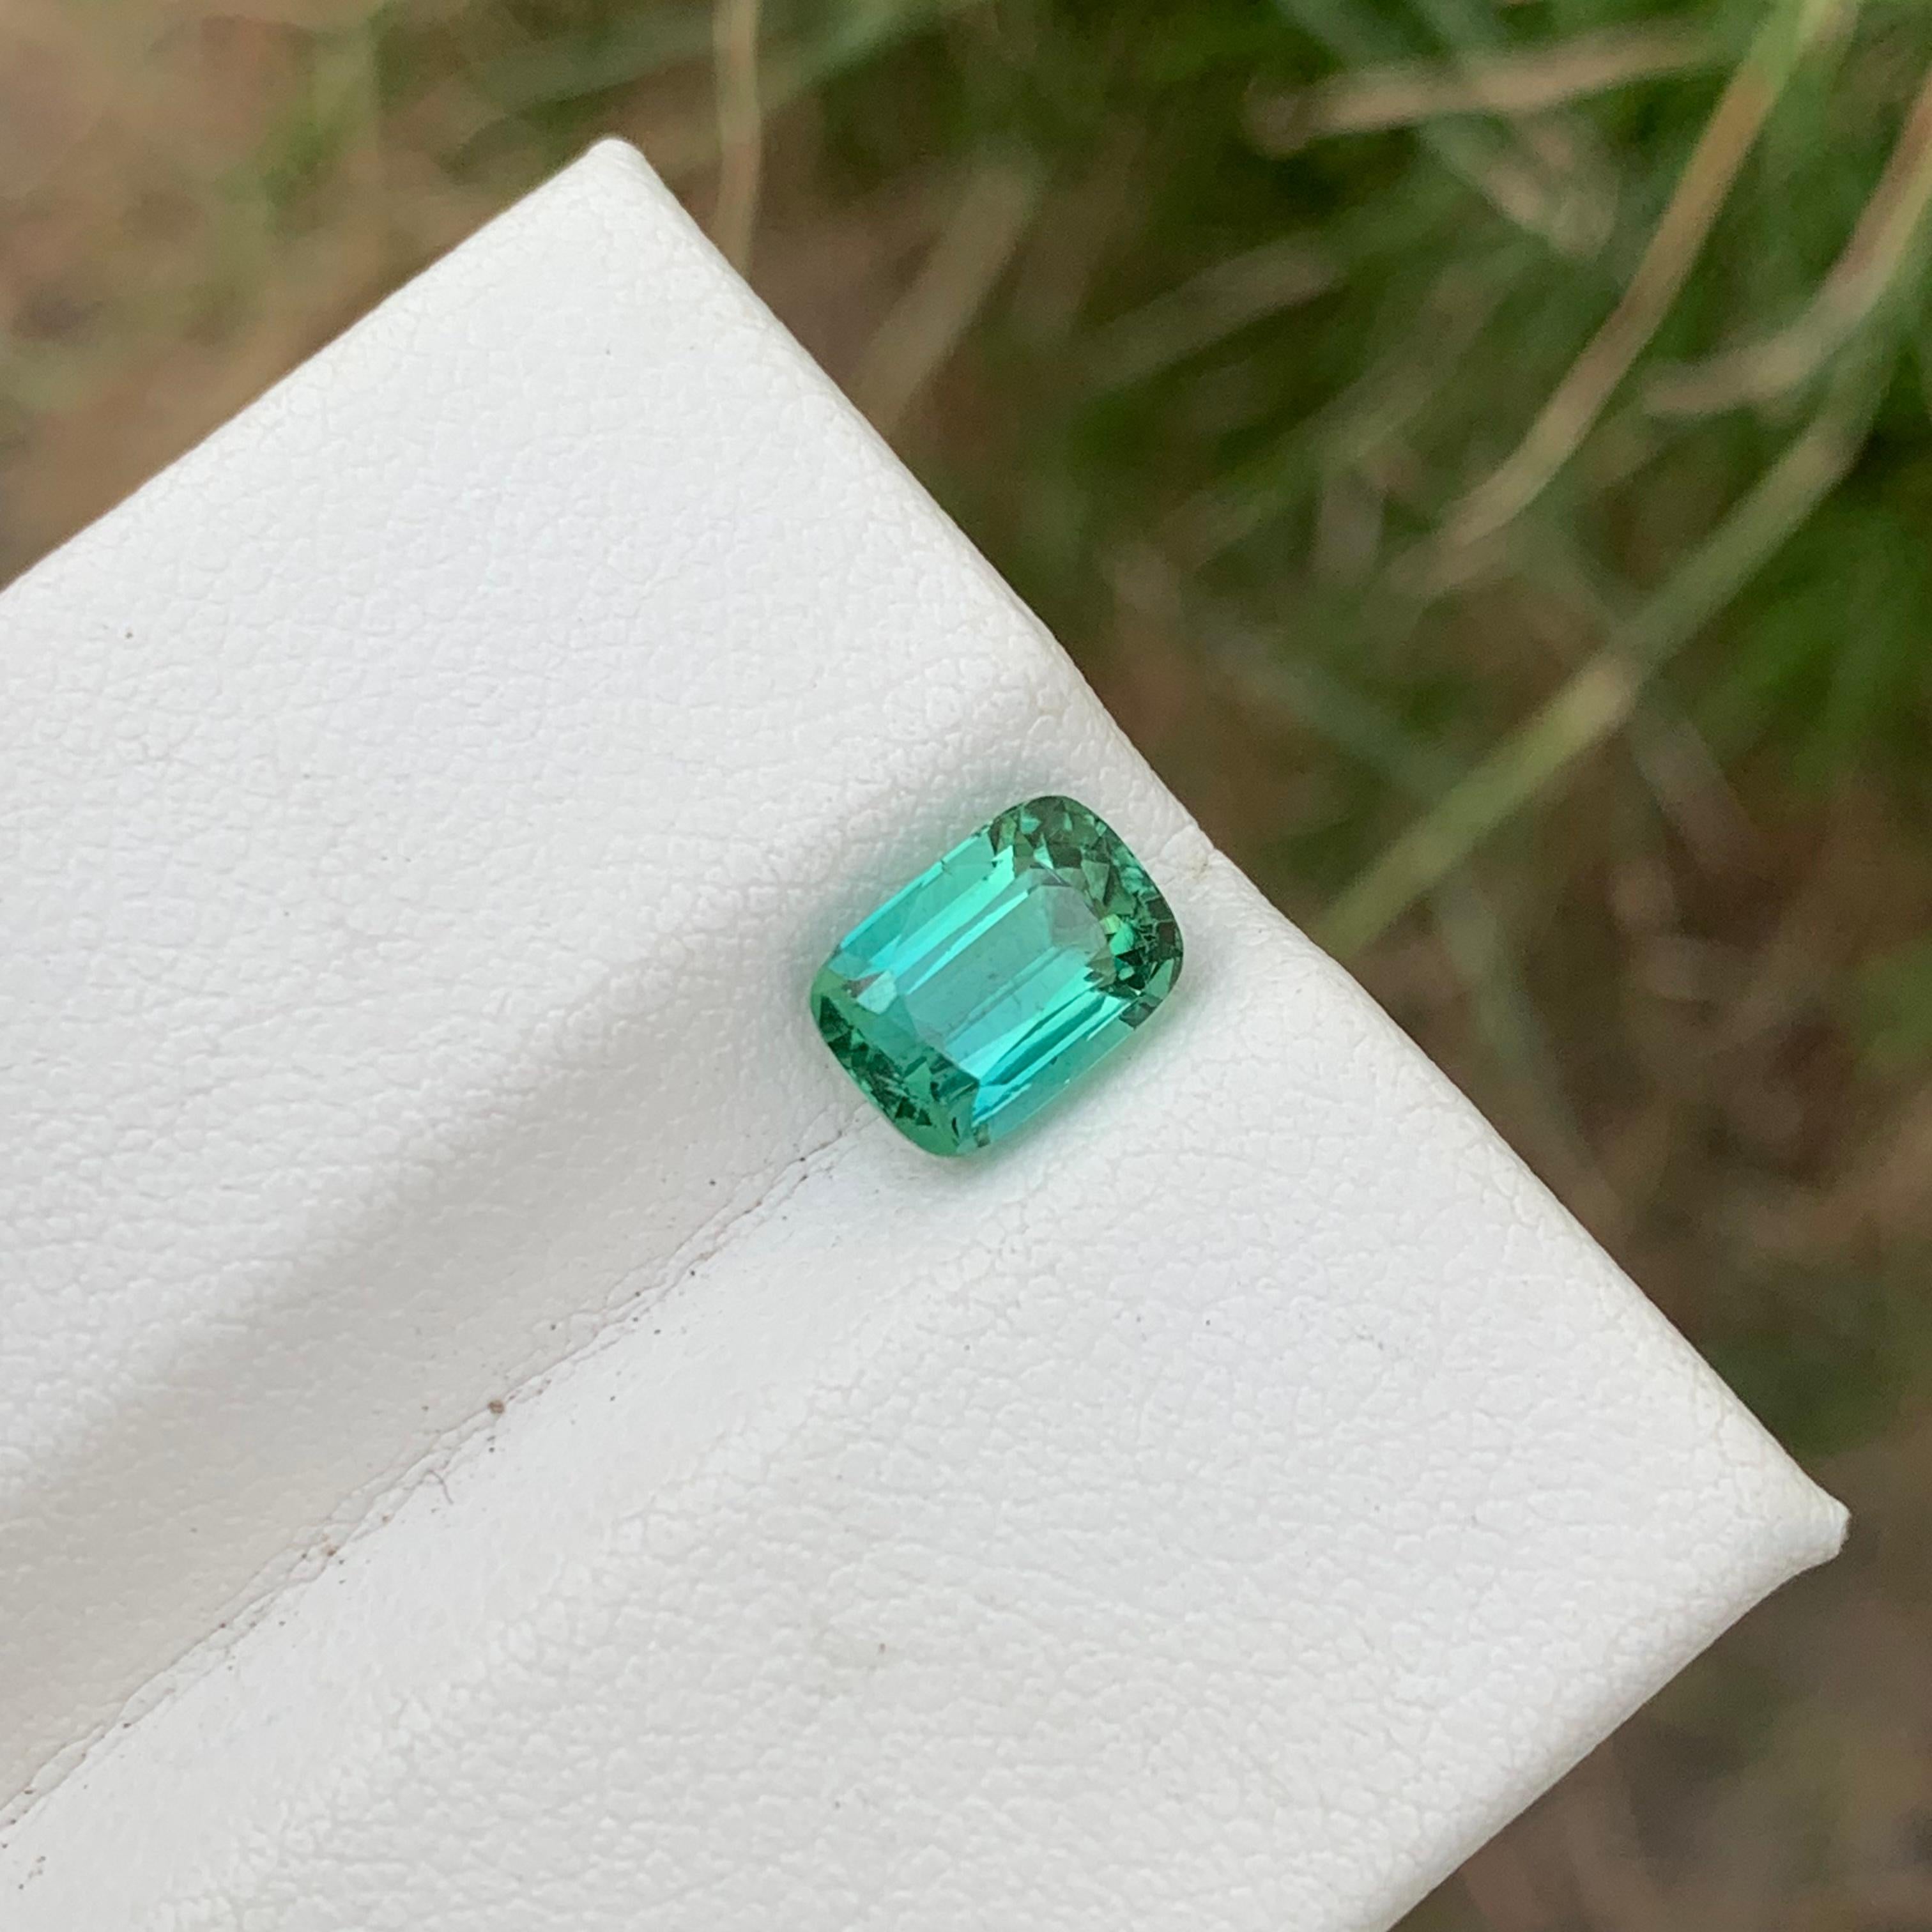 Beauteous 1.90 Cts Blueish Green Loose Tourmaline Ring Gemstone Afghan Mine  For Sale 1